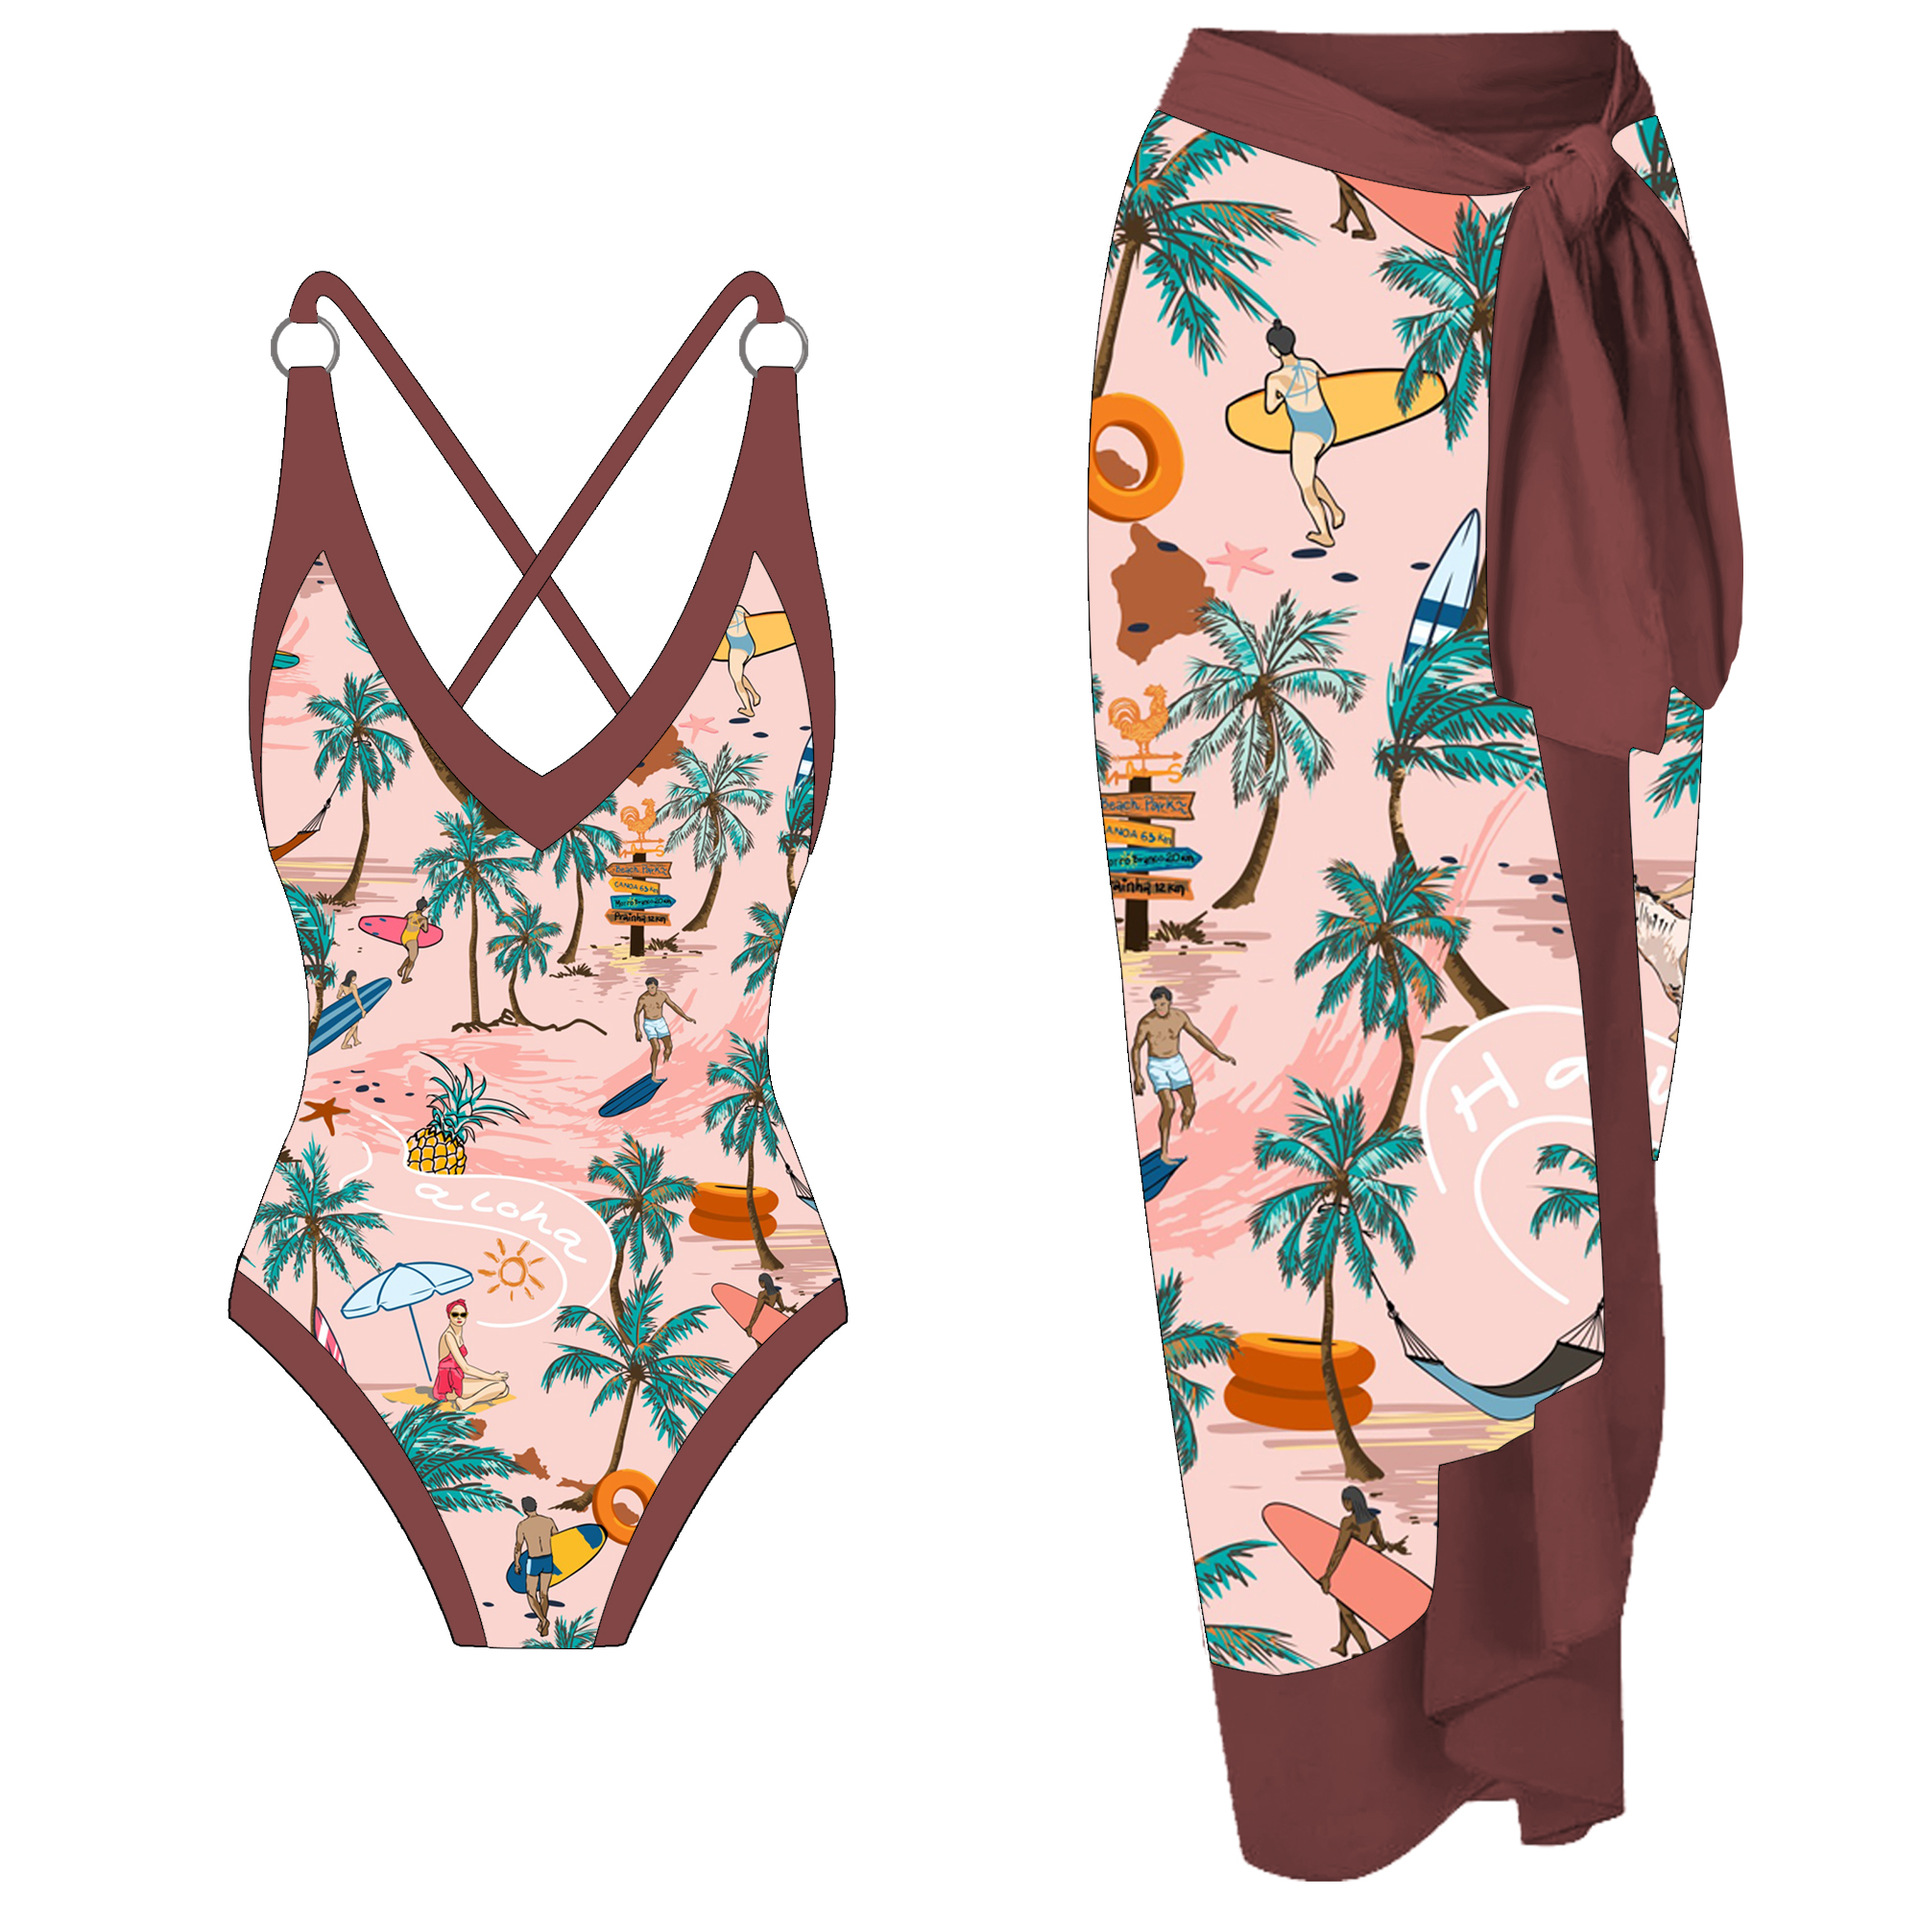 2023 New European and American Foreign Trade One-Piece Swimsuit Customized Hawaiian Printed Beach Dress Two Piece Swimsuit